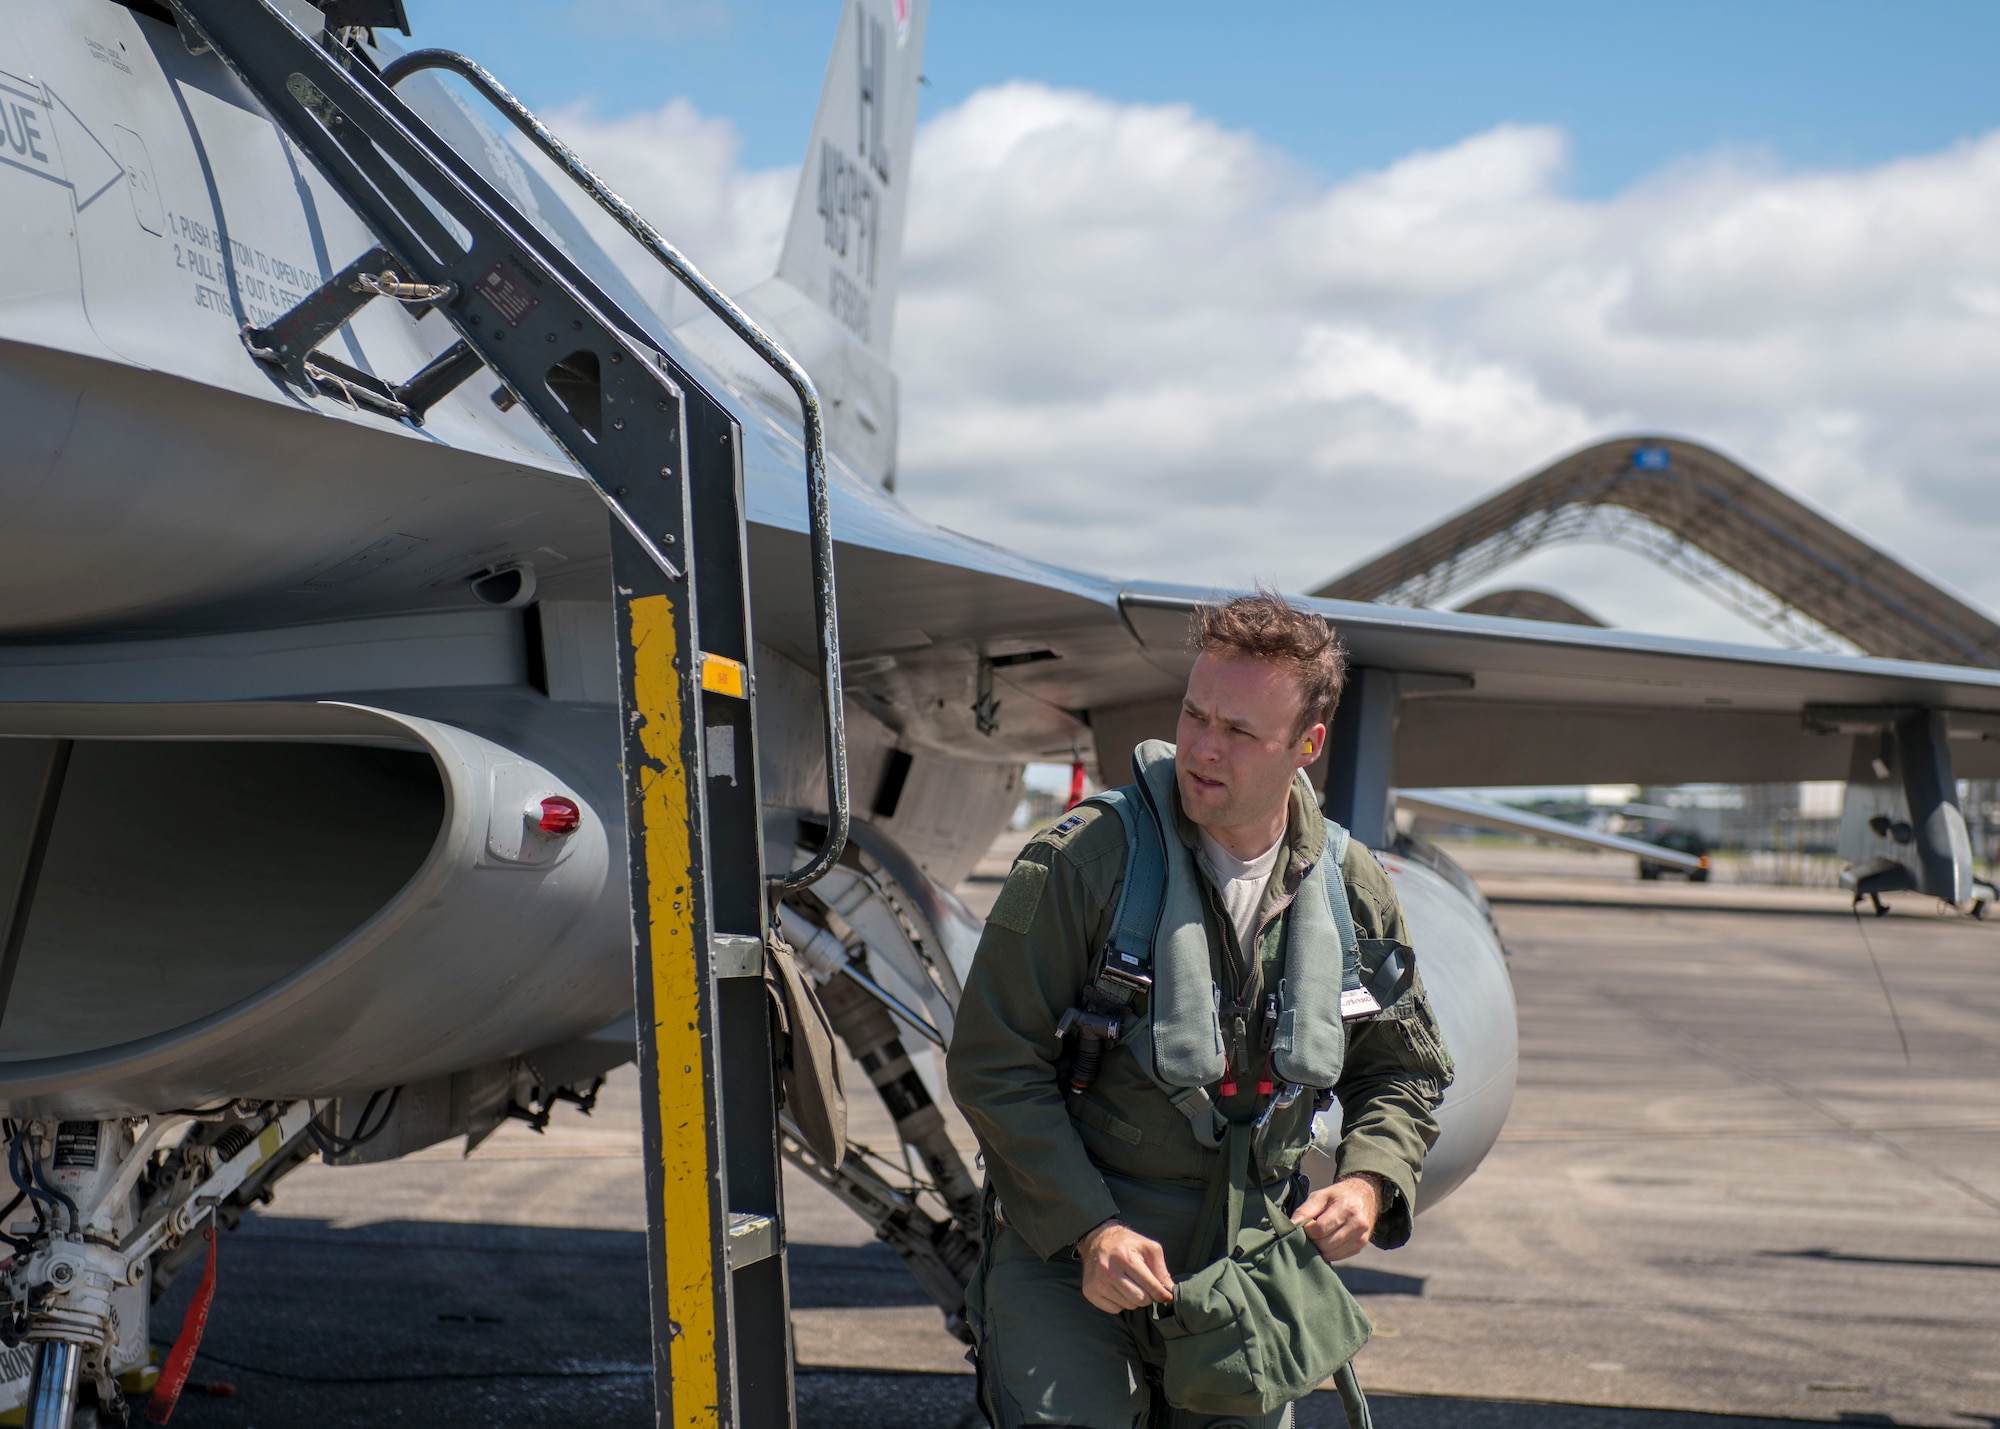 U.S. Air Force Capt. Robert Ritchie, 8th Fighter Squadron F-16 Basic-Course student pilot, begins an inspection after a flight, April 9, 2019, on Naval Air Station Joint Reserve Base New Orleans, La. During the temporary duty assignment, the B-Course students completed their syllabus training. (U.S. Air Force photo by Airman 1st Class Kindra Stewart)